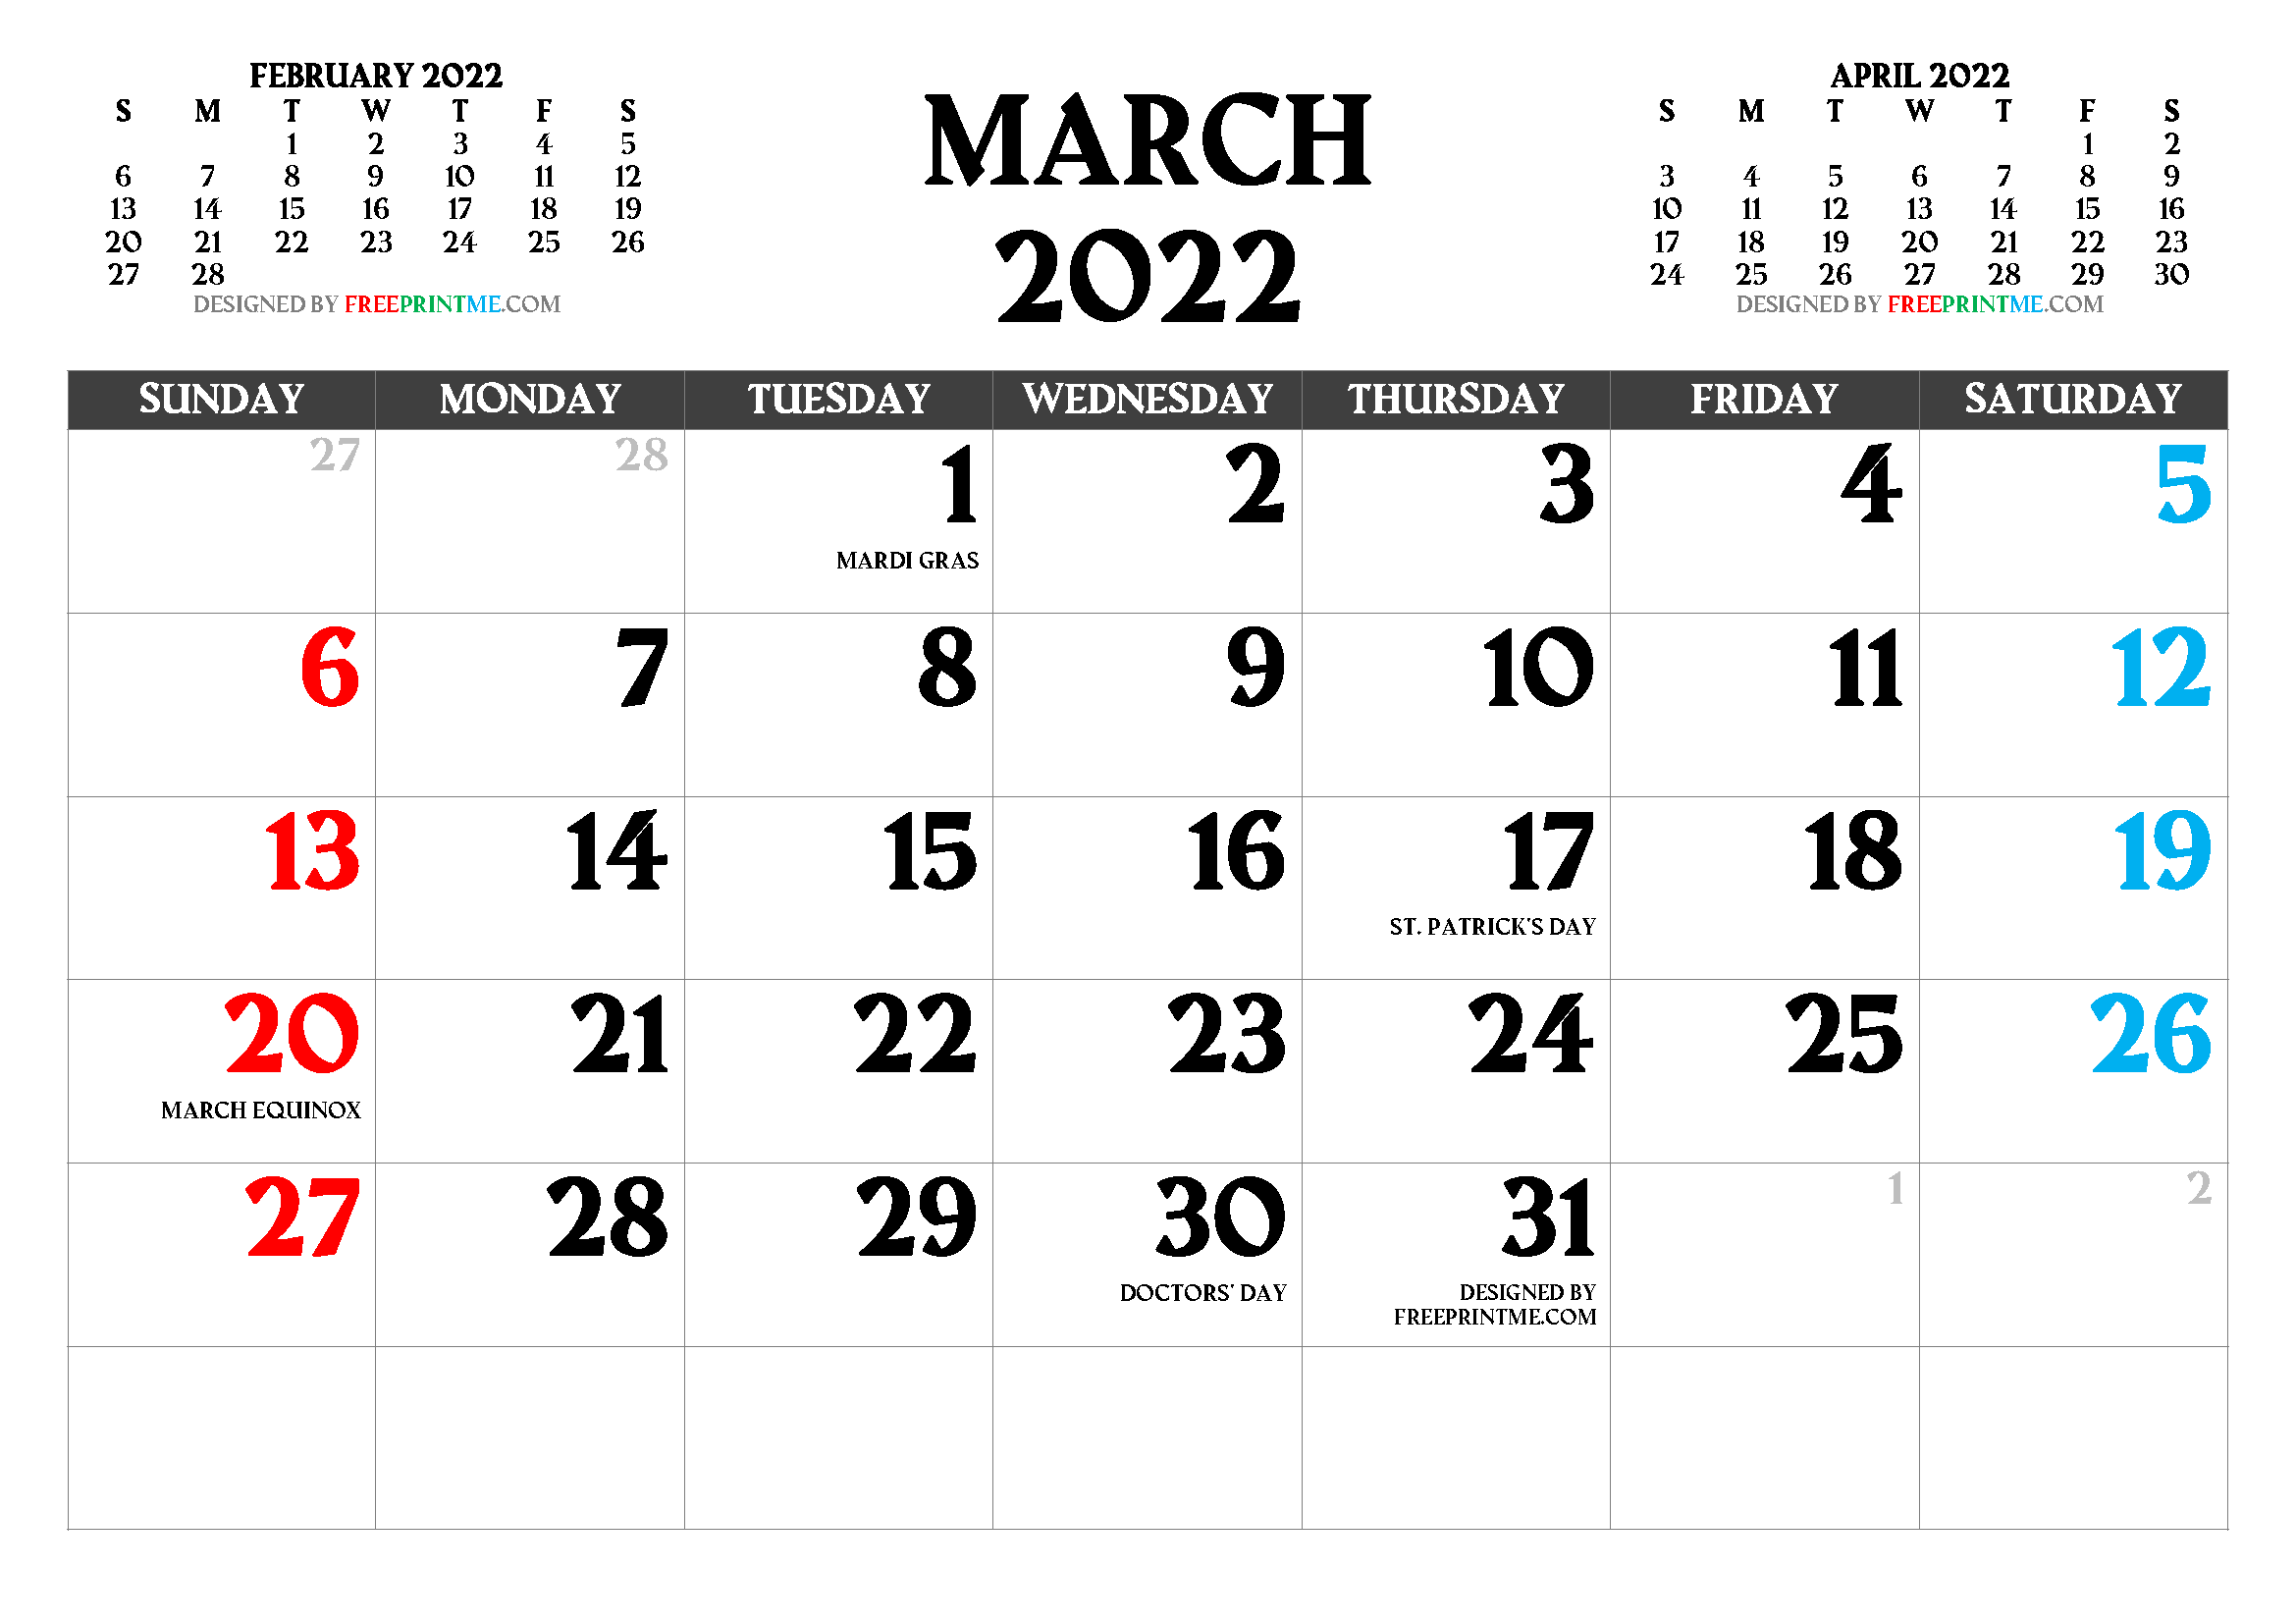 Print 2022 Calendar By Month Free Printable March 2022 Calendar Pdf And Image